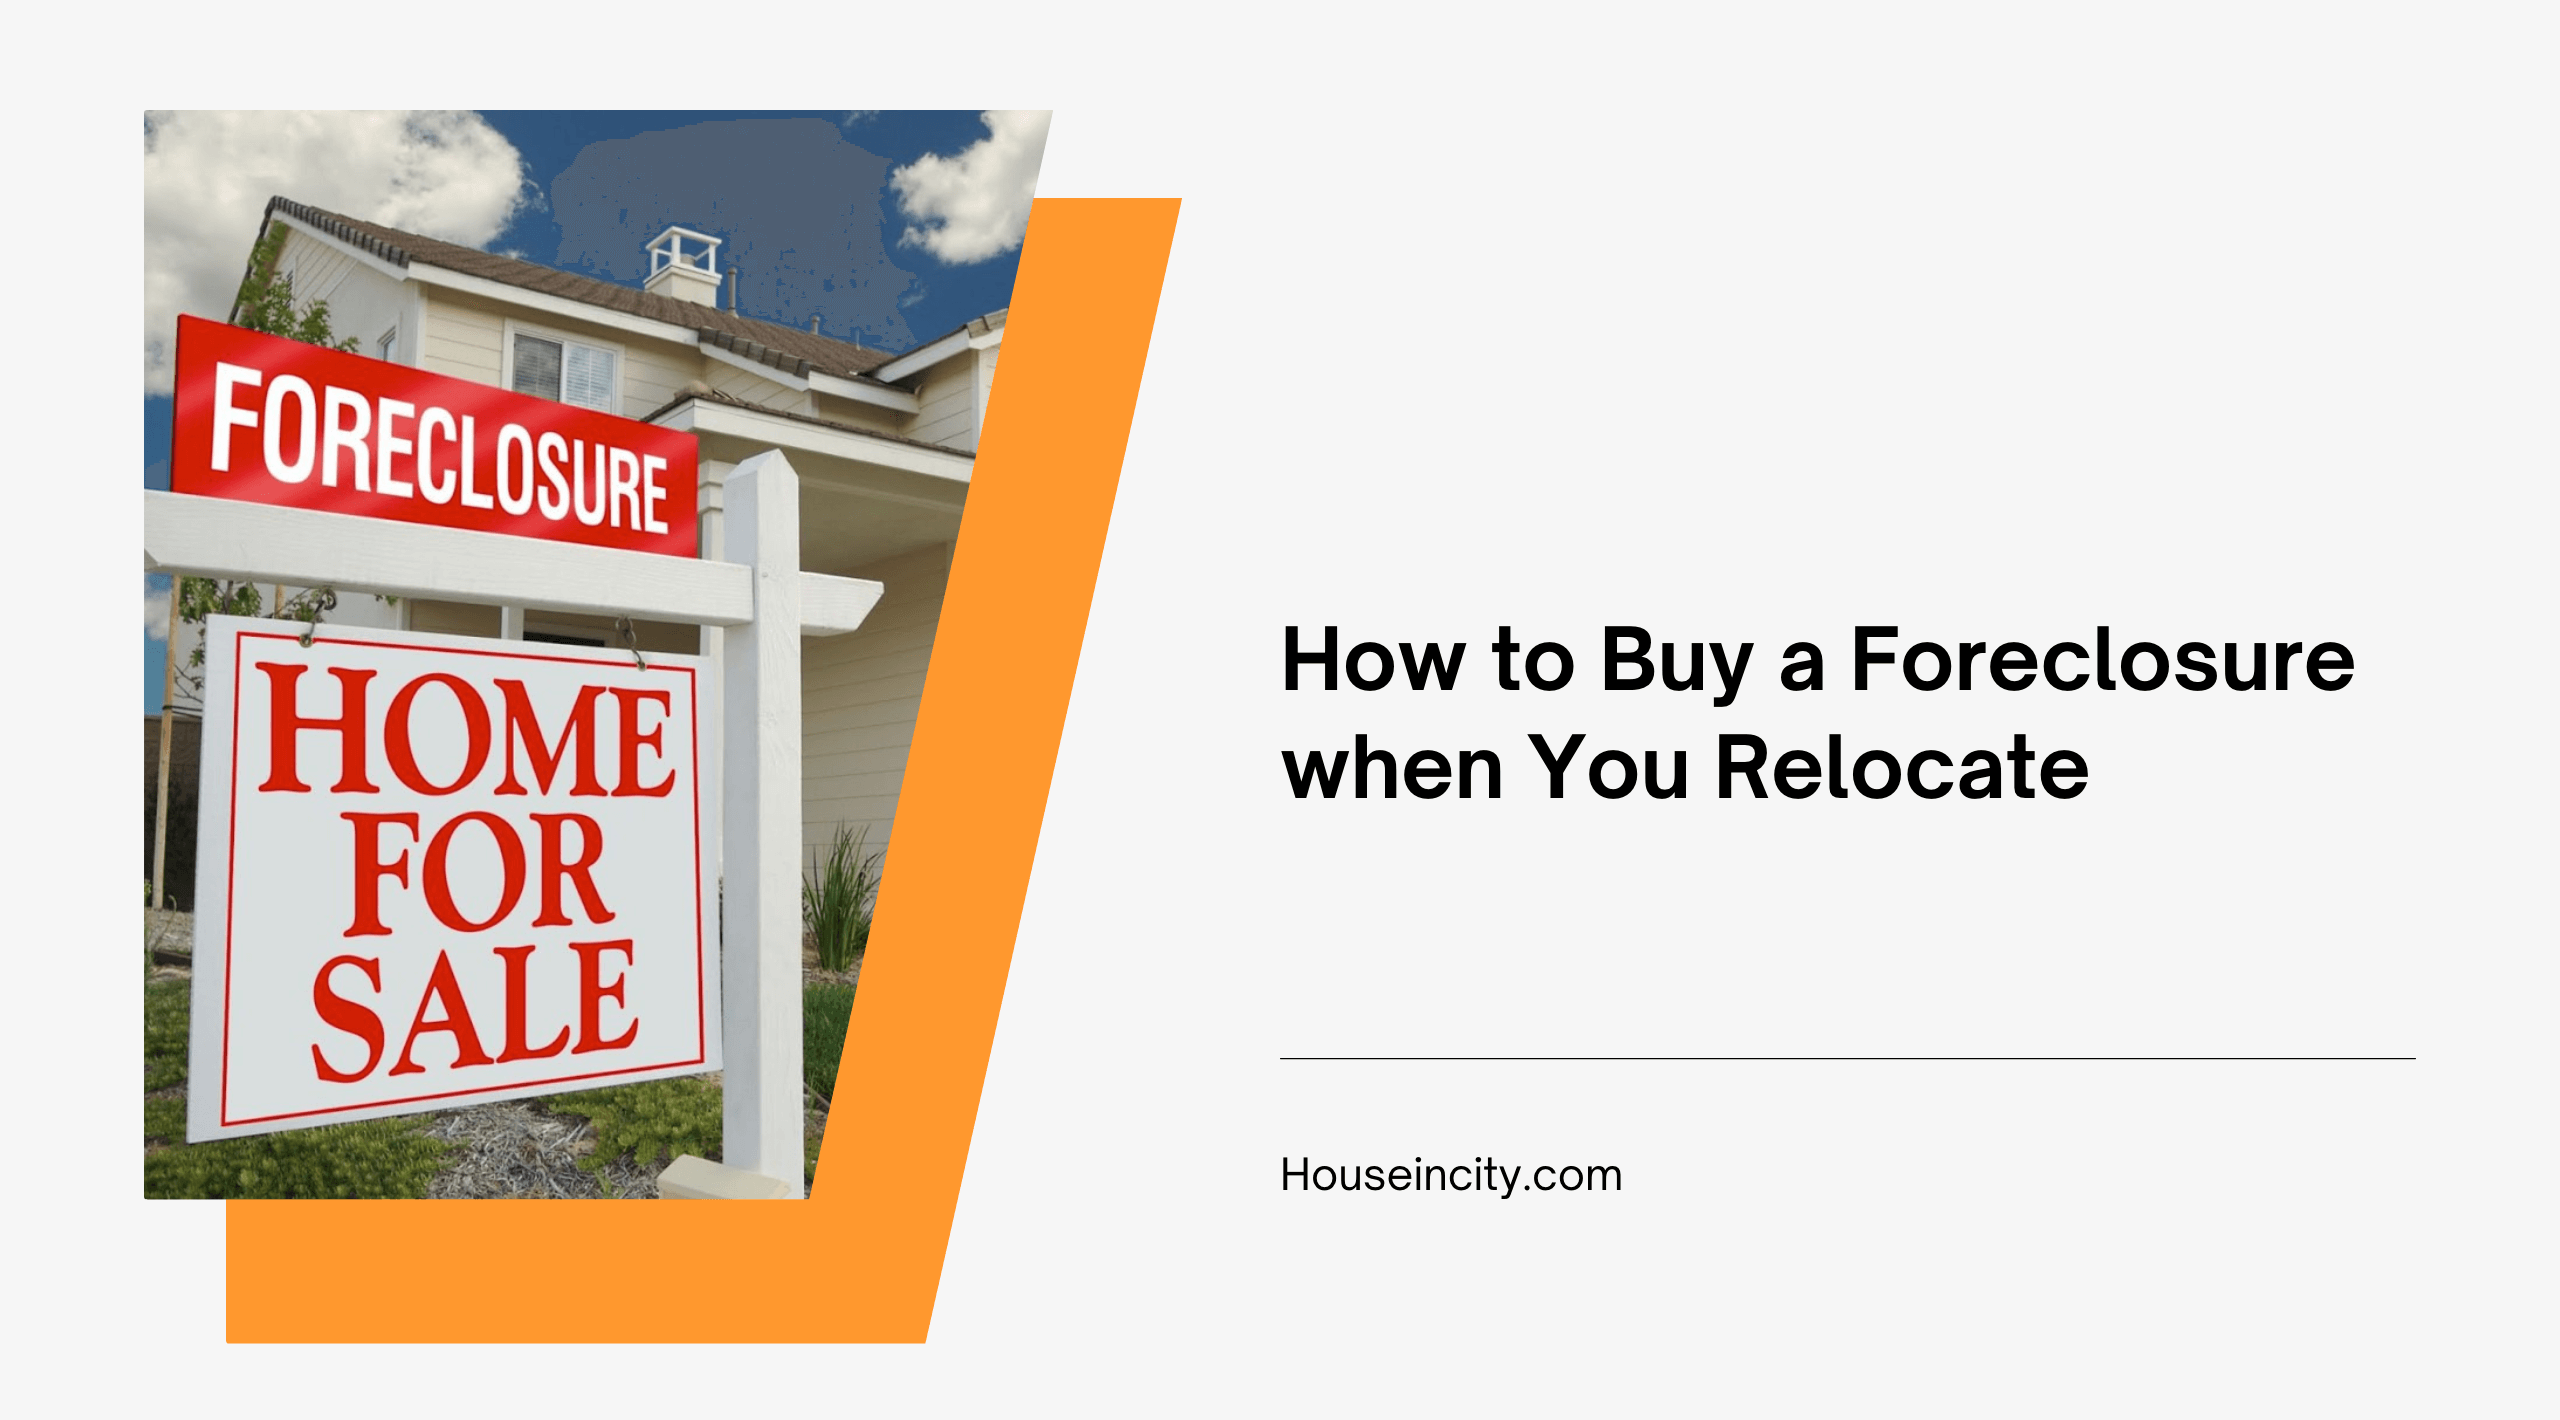 How to Buy a Foreclosure when You Relocate